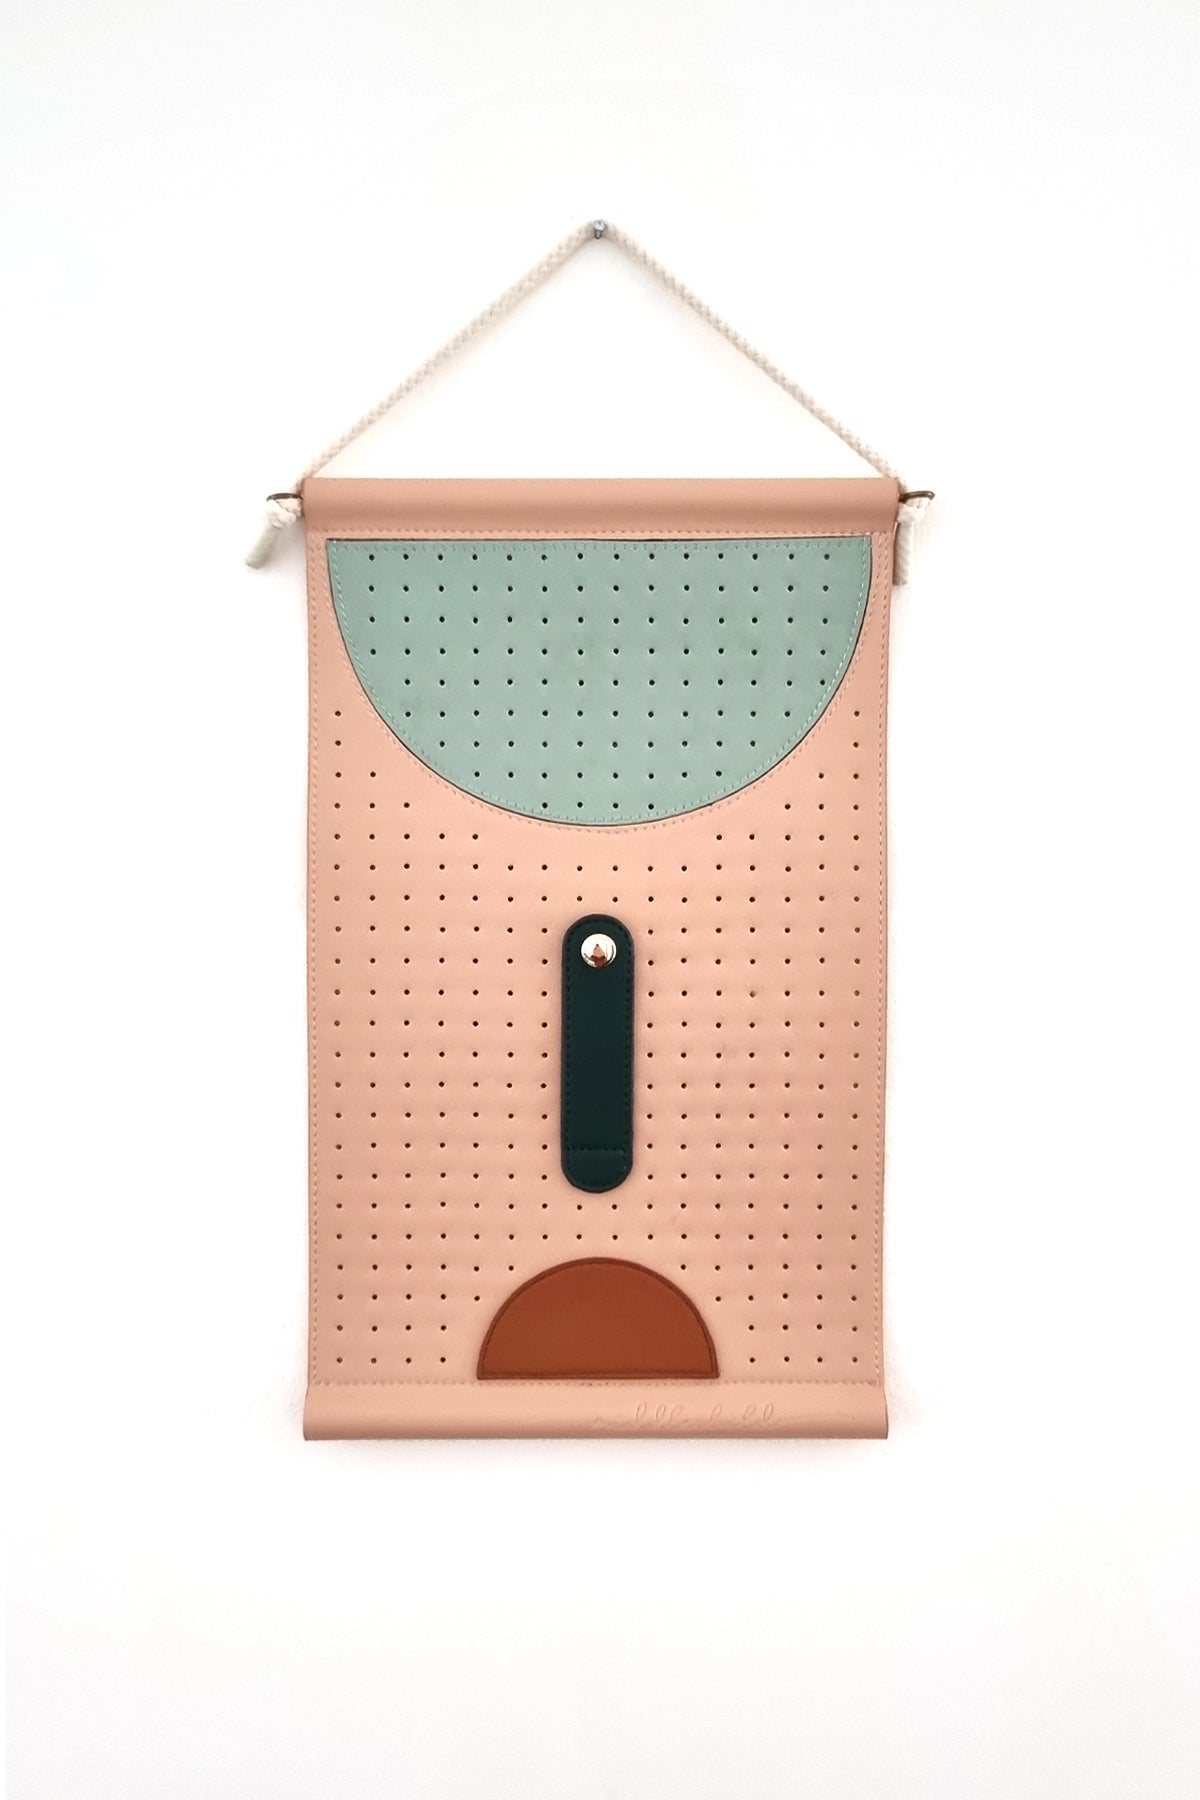 A peach perforated wall hanging is hung by a rope against a white wall. The wall hanging features a large perforated sage half circle at the top, a forest green elongated oval stitched to the middle with a gold button clasp, and below is a tan half circle.